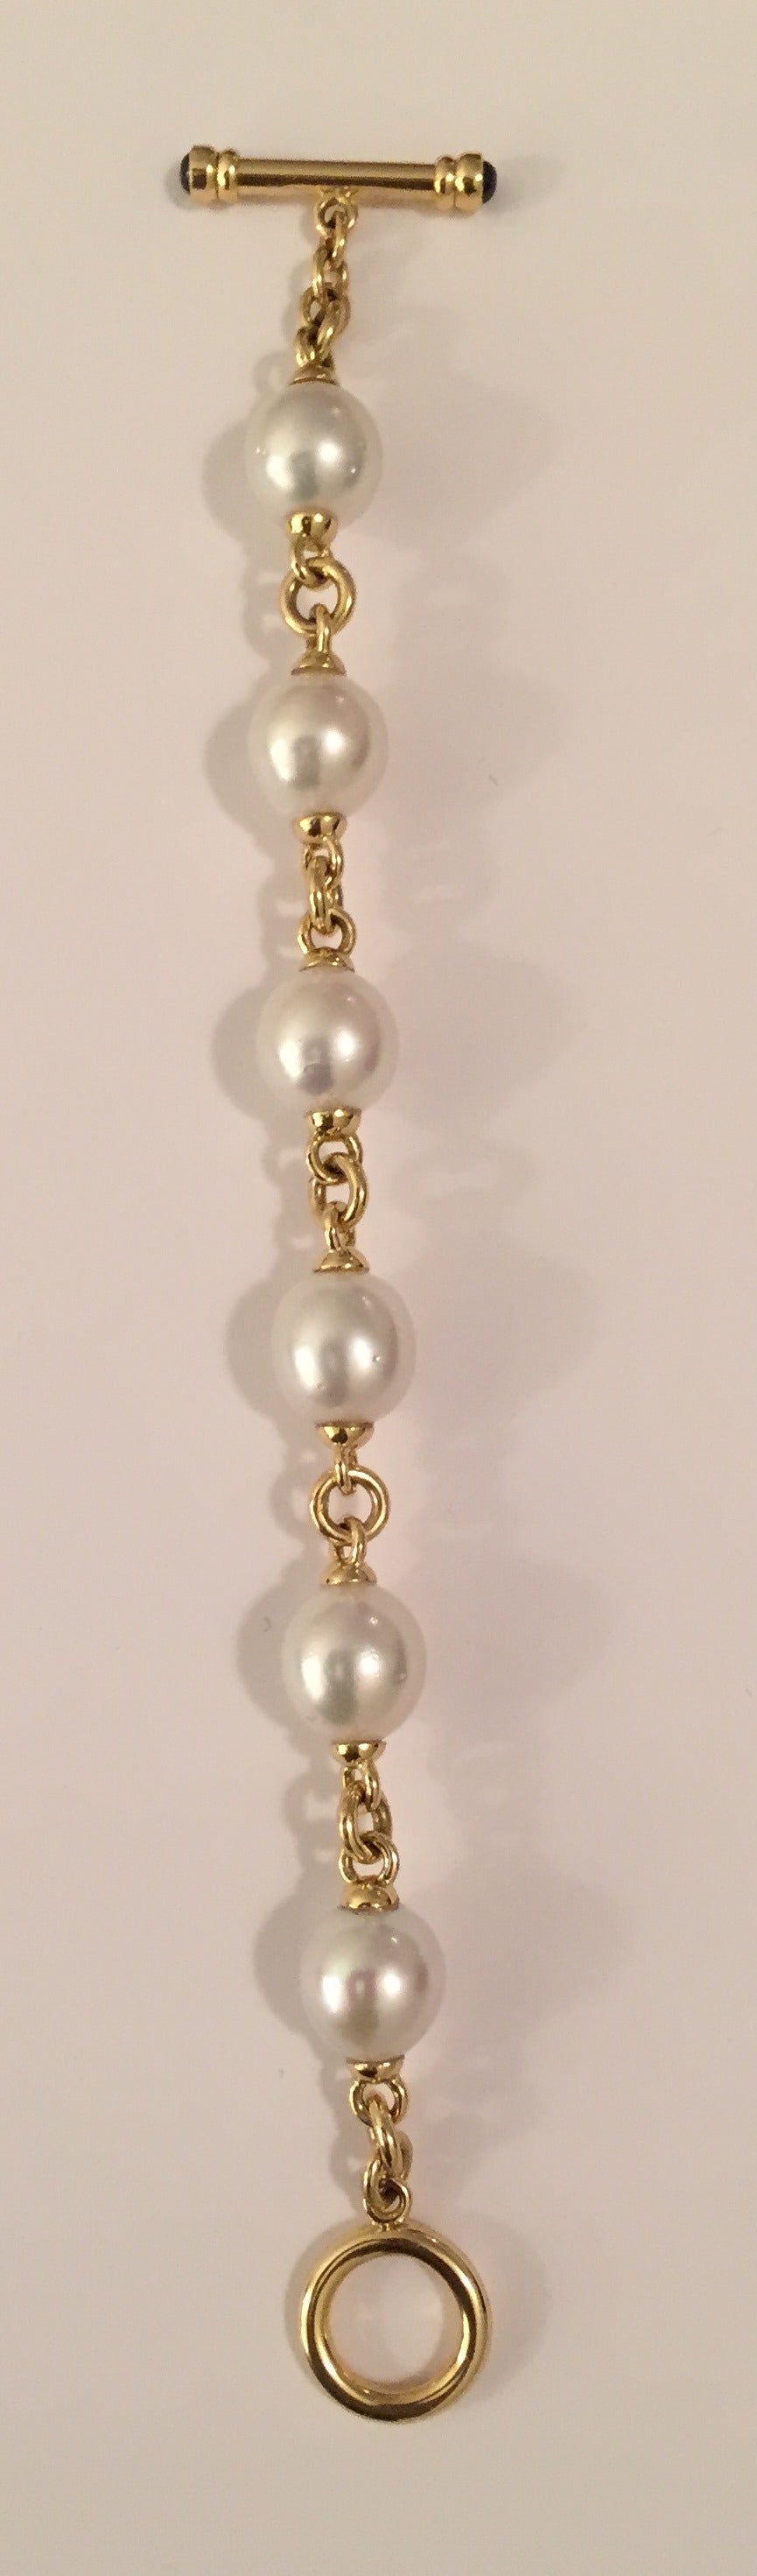 18kt Yellow Gold link and South Sea Pearl Bracelet with 6 South Sea pearls measuring 12 x 14 mm finished with gold toggle accented with 2 sapphires cabochon on each end.

Made to measure any size wrist.

Please contact us with any inquiries you